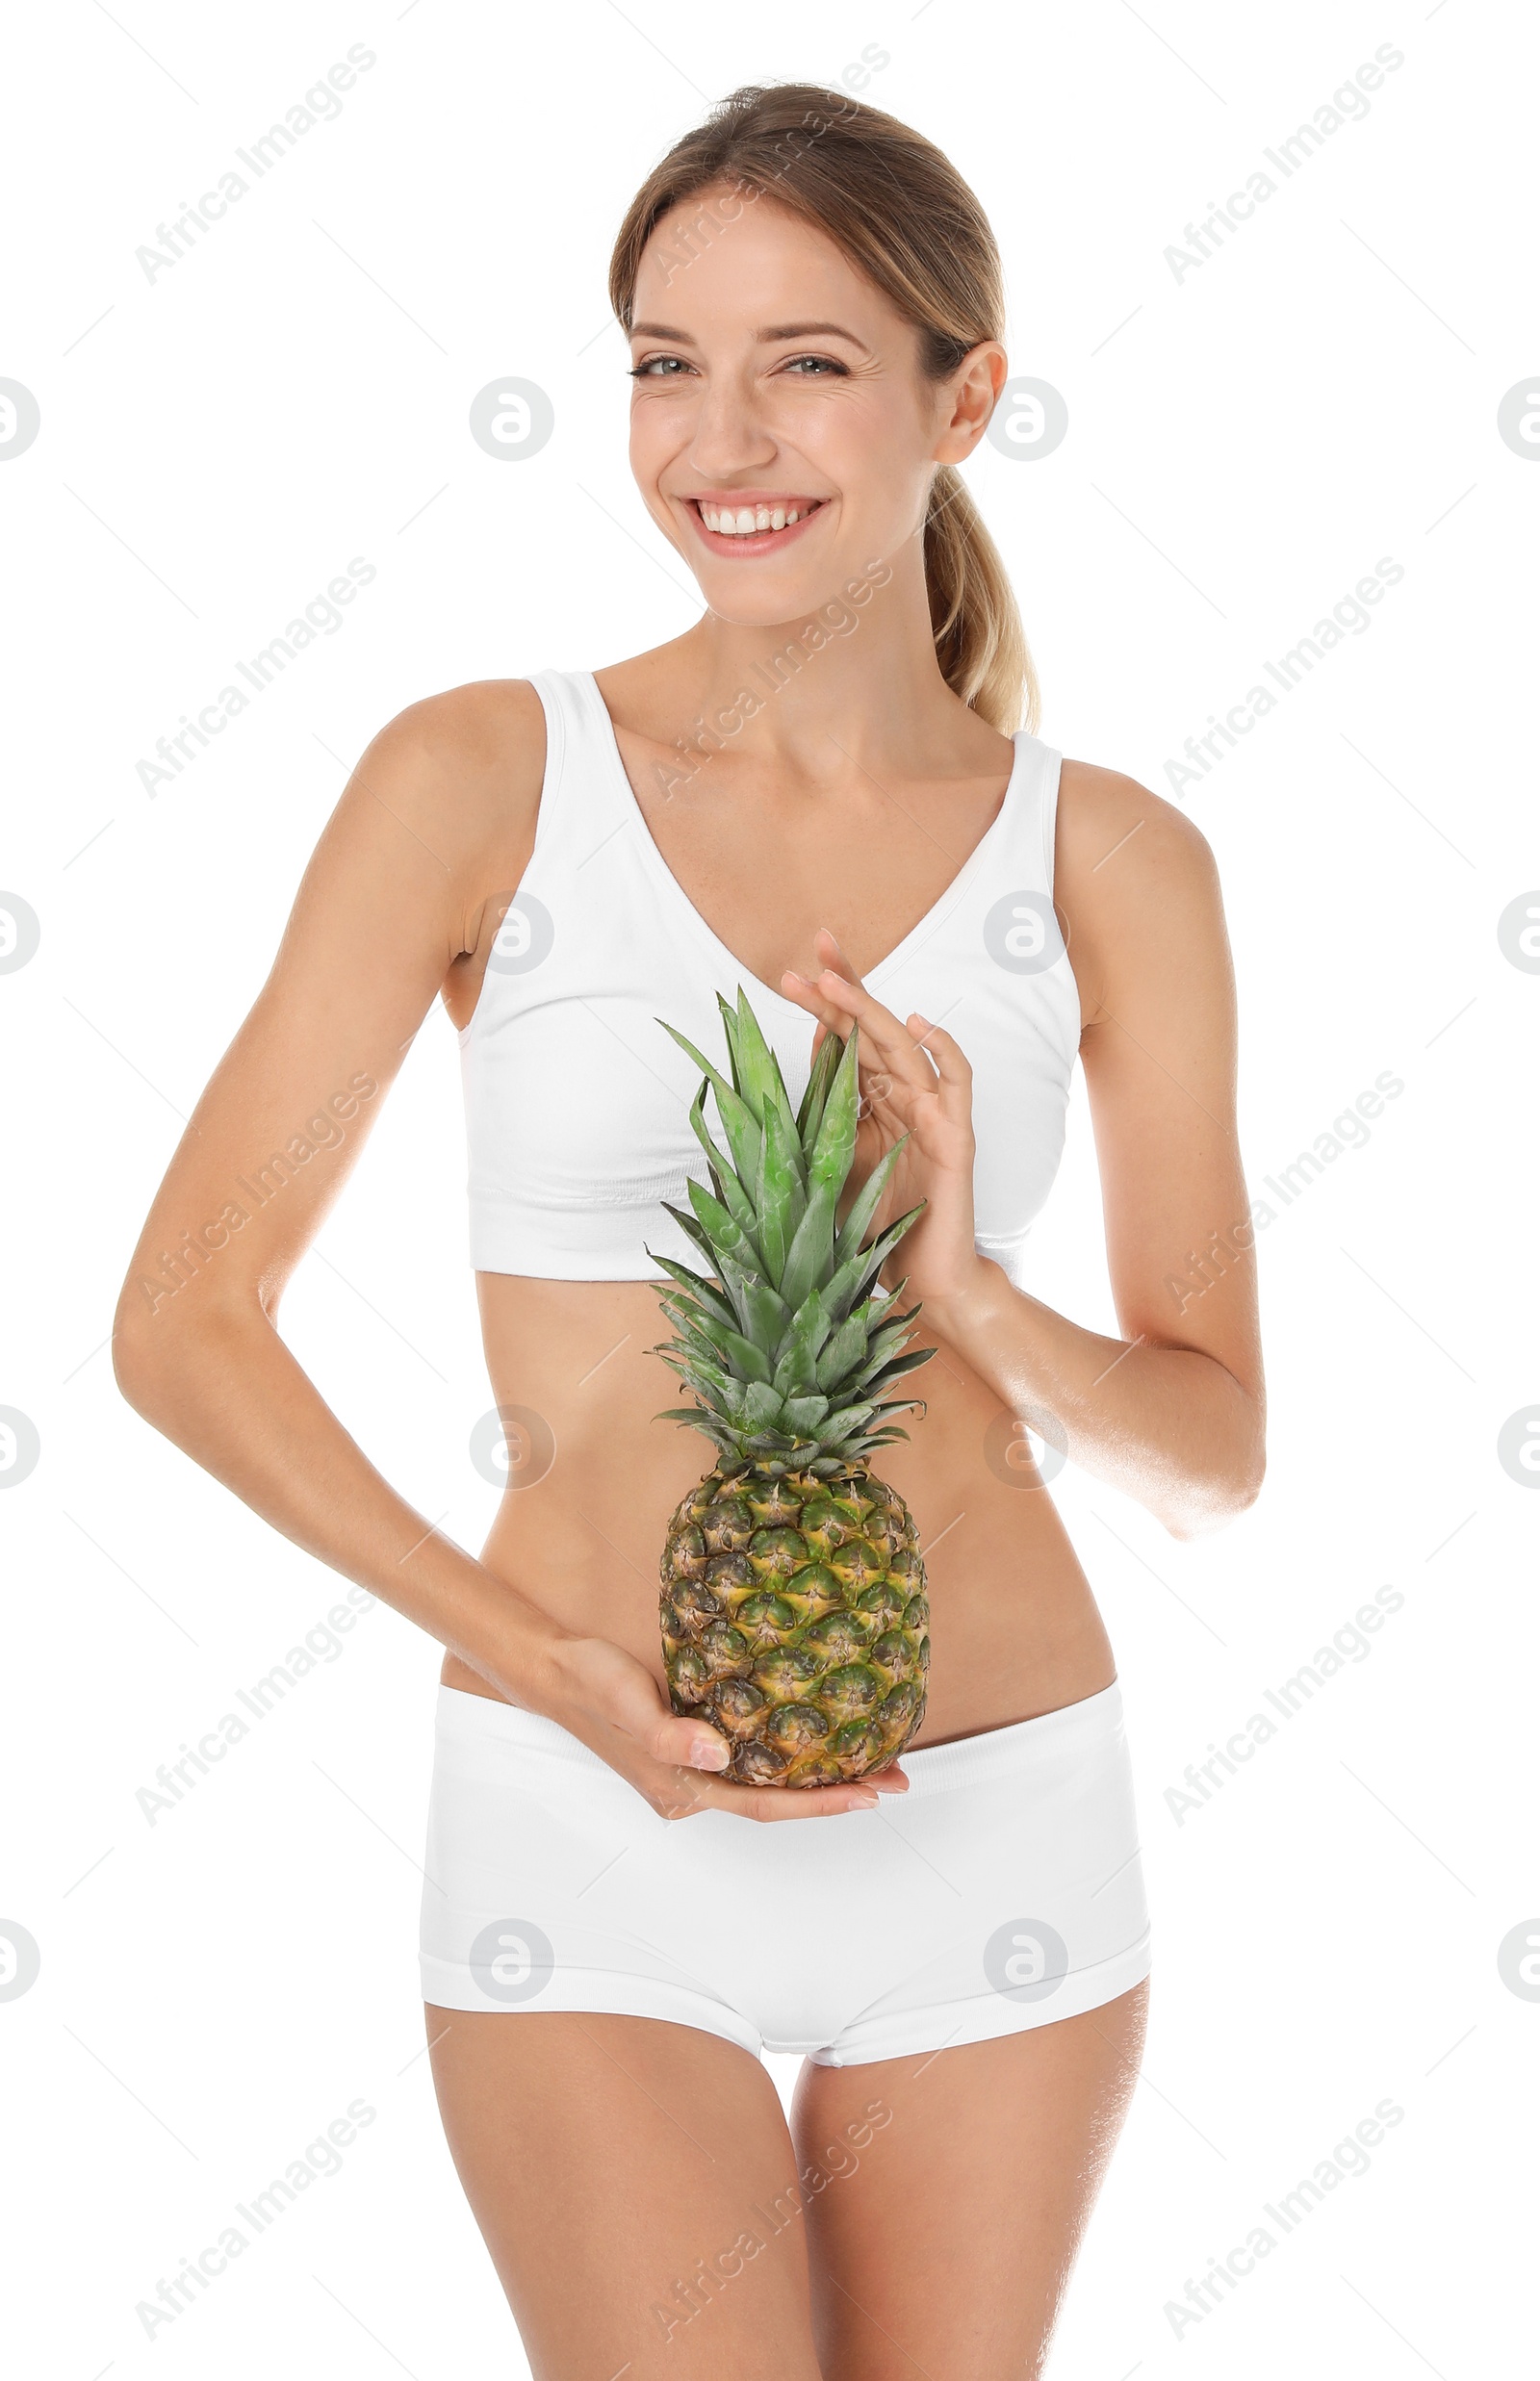 Photo of Happy slim woman in underwear holding pineapple on white background. Weight loss diet